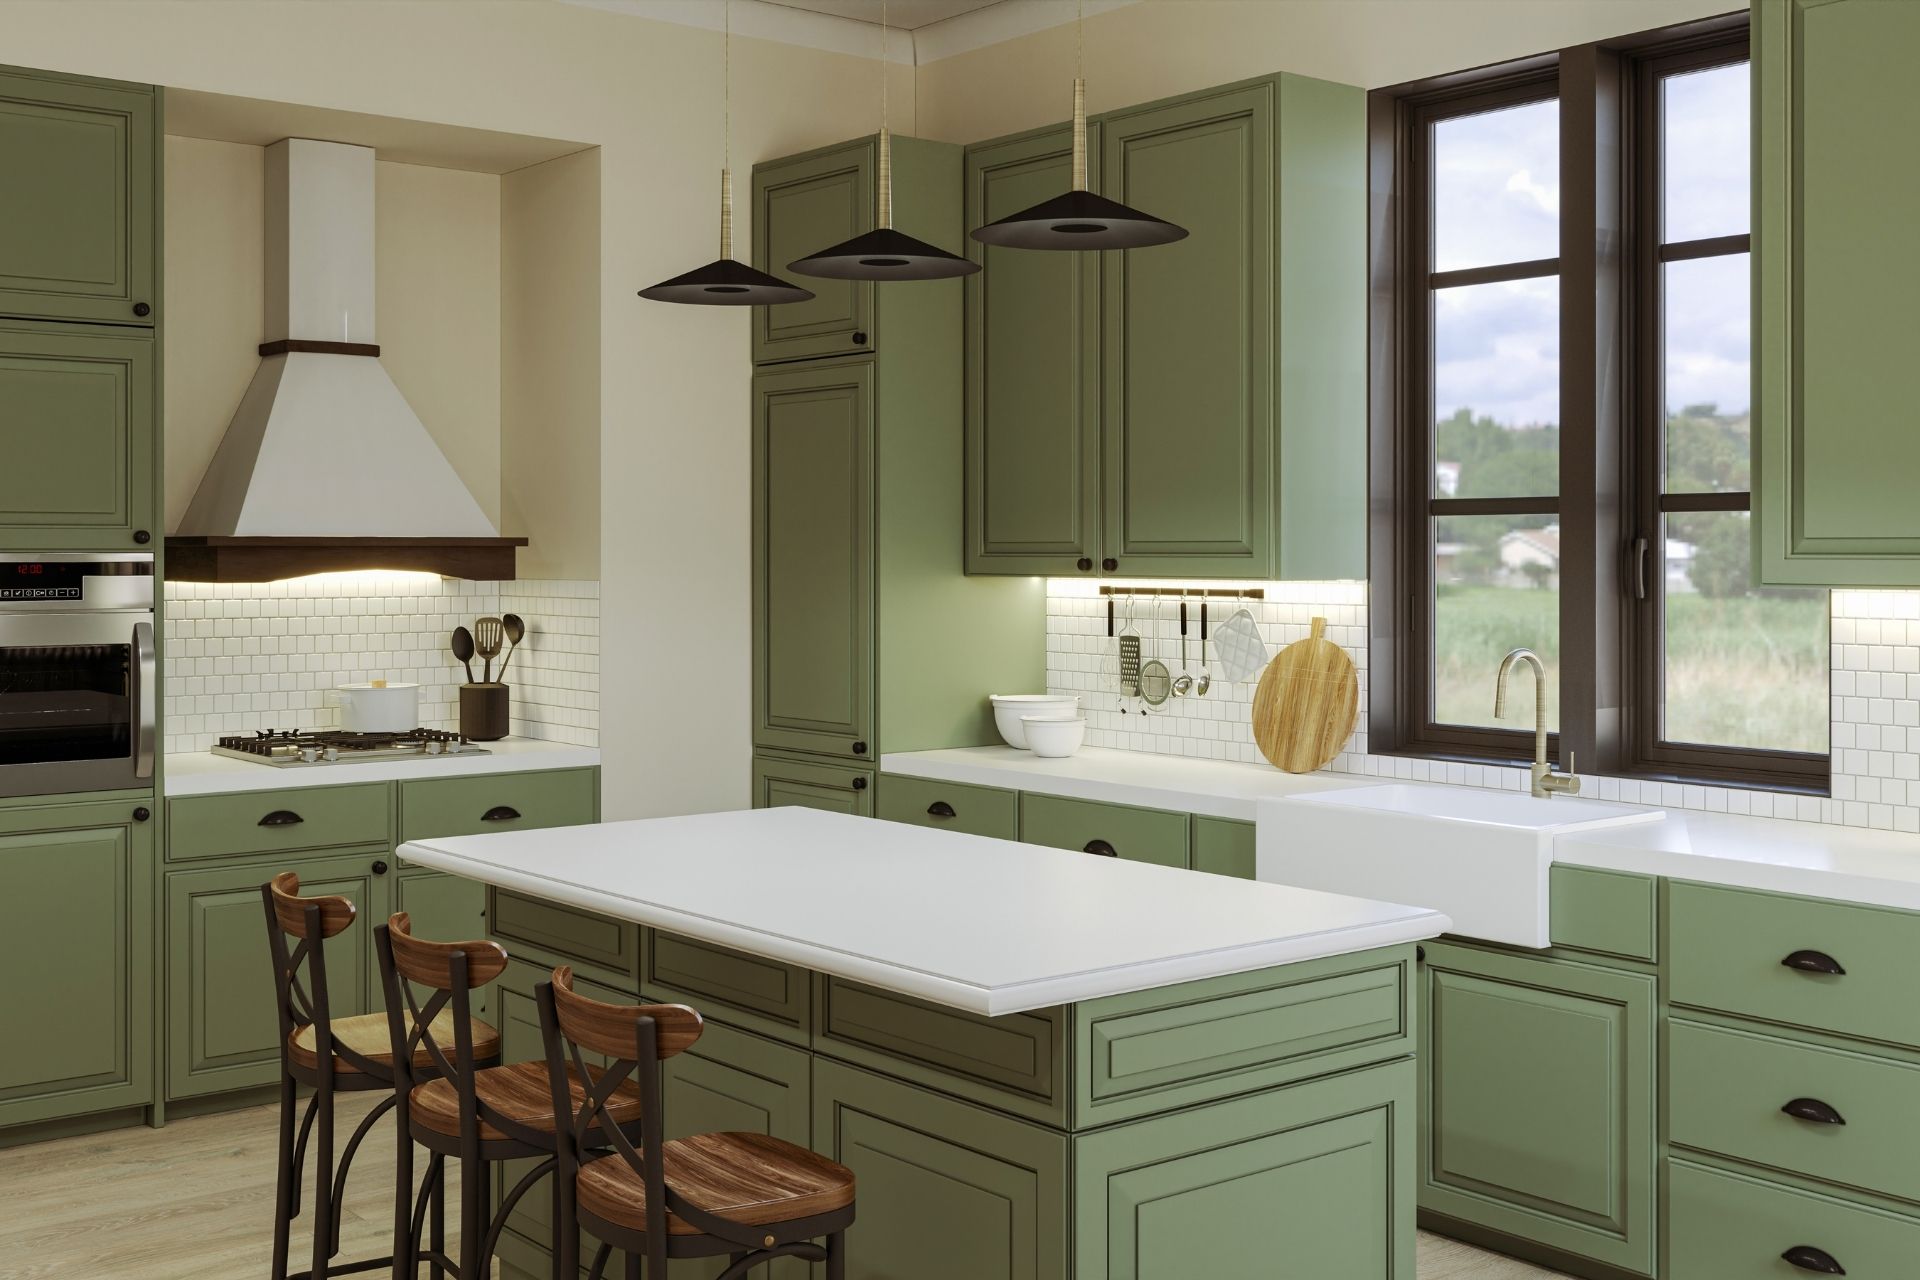 kitchen cabinet handles on light green cabnets